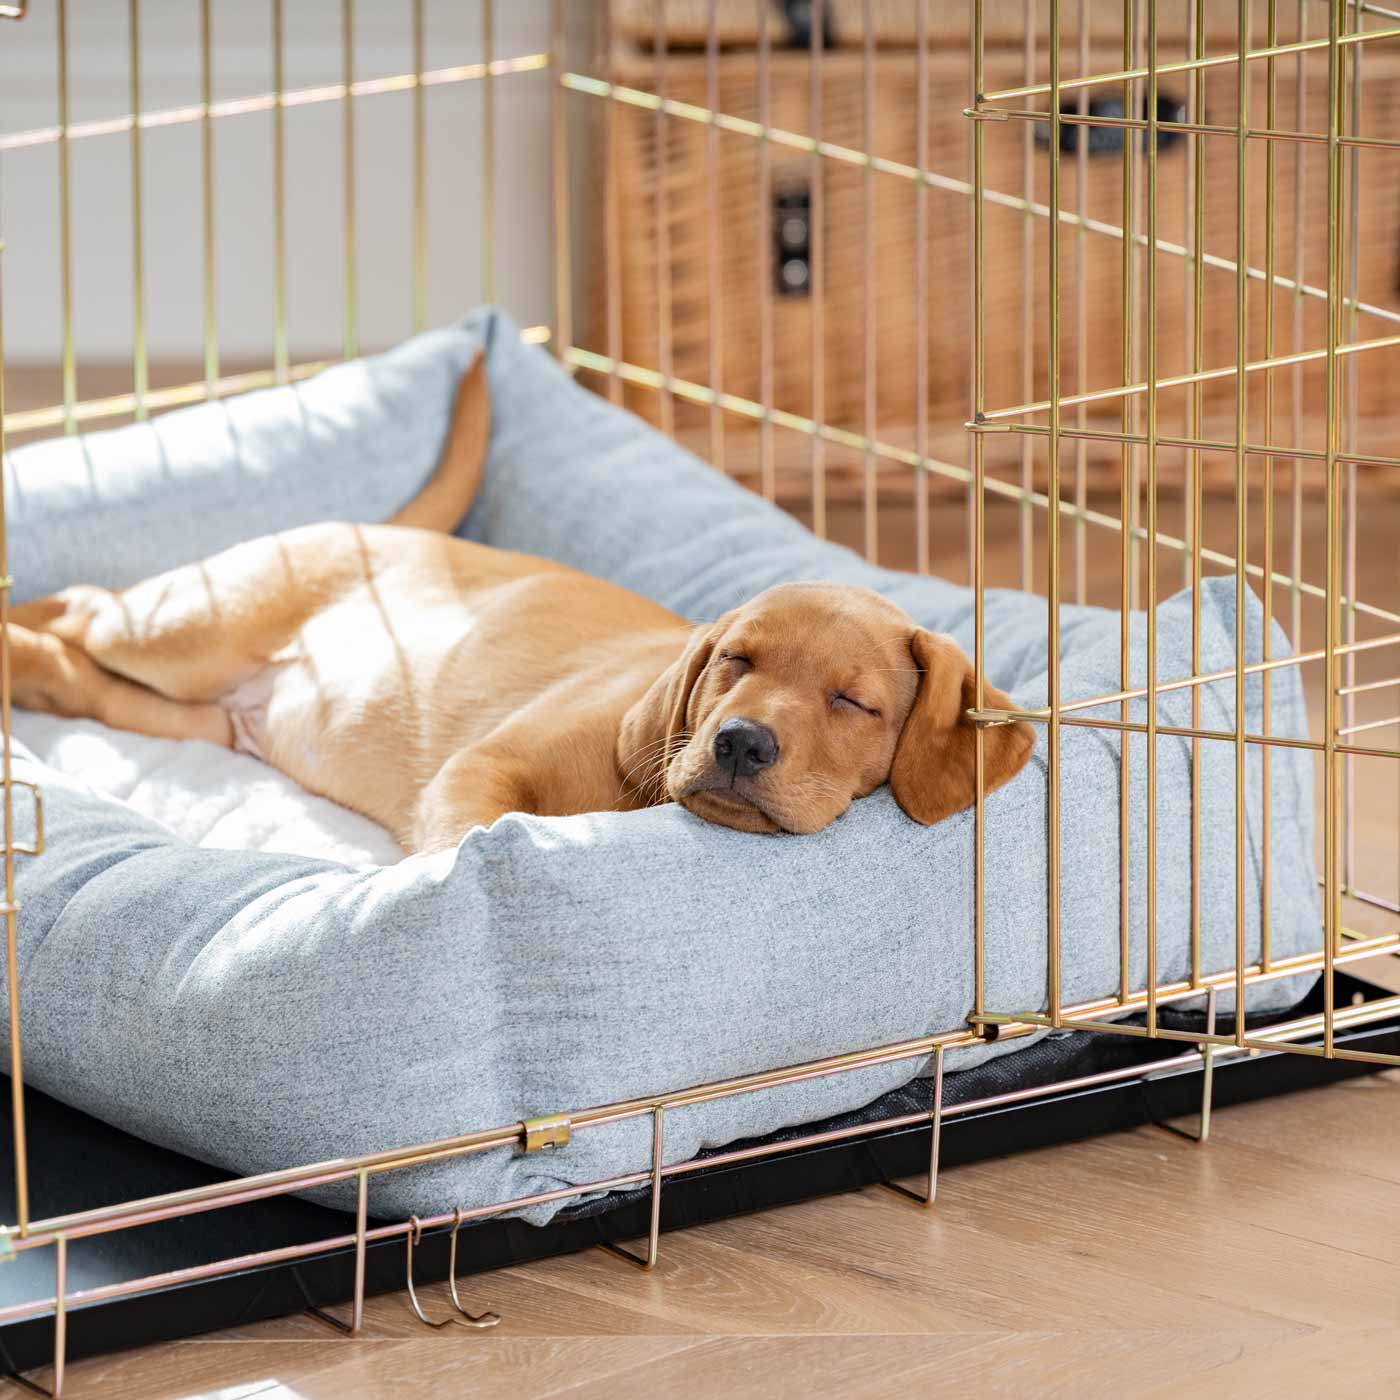 Inchmurrin Cosy & Calm Puppy Box Bed, The Perfect Dog Crate Bed For Pets! To Build The Ultimate Dog Den! In Light Grey Inchmurrin Iceberg! Available To Personalise Now at Lords & Labradors 